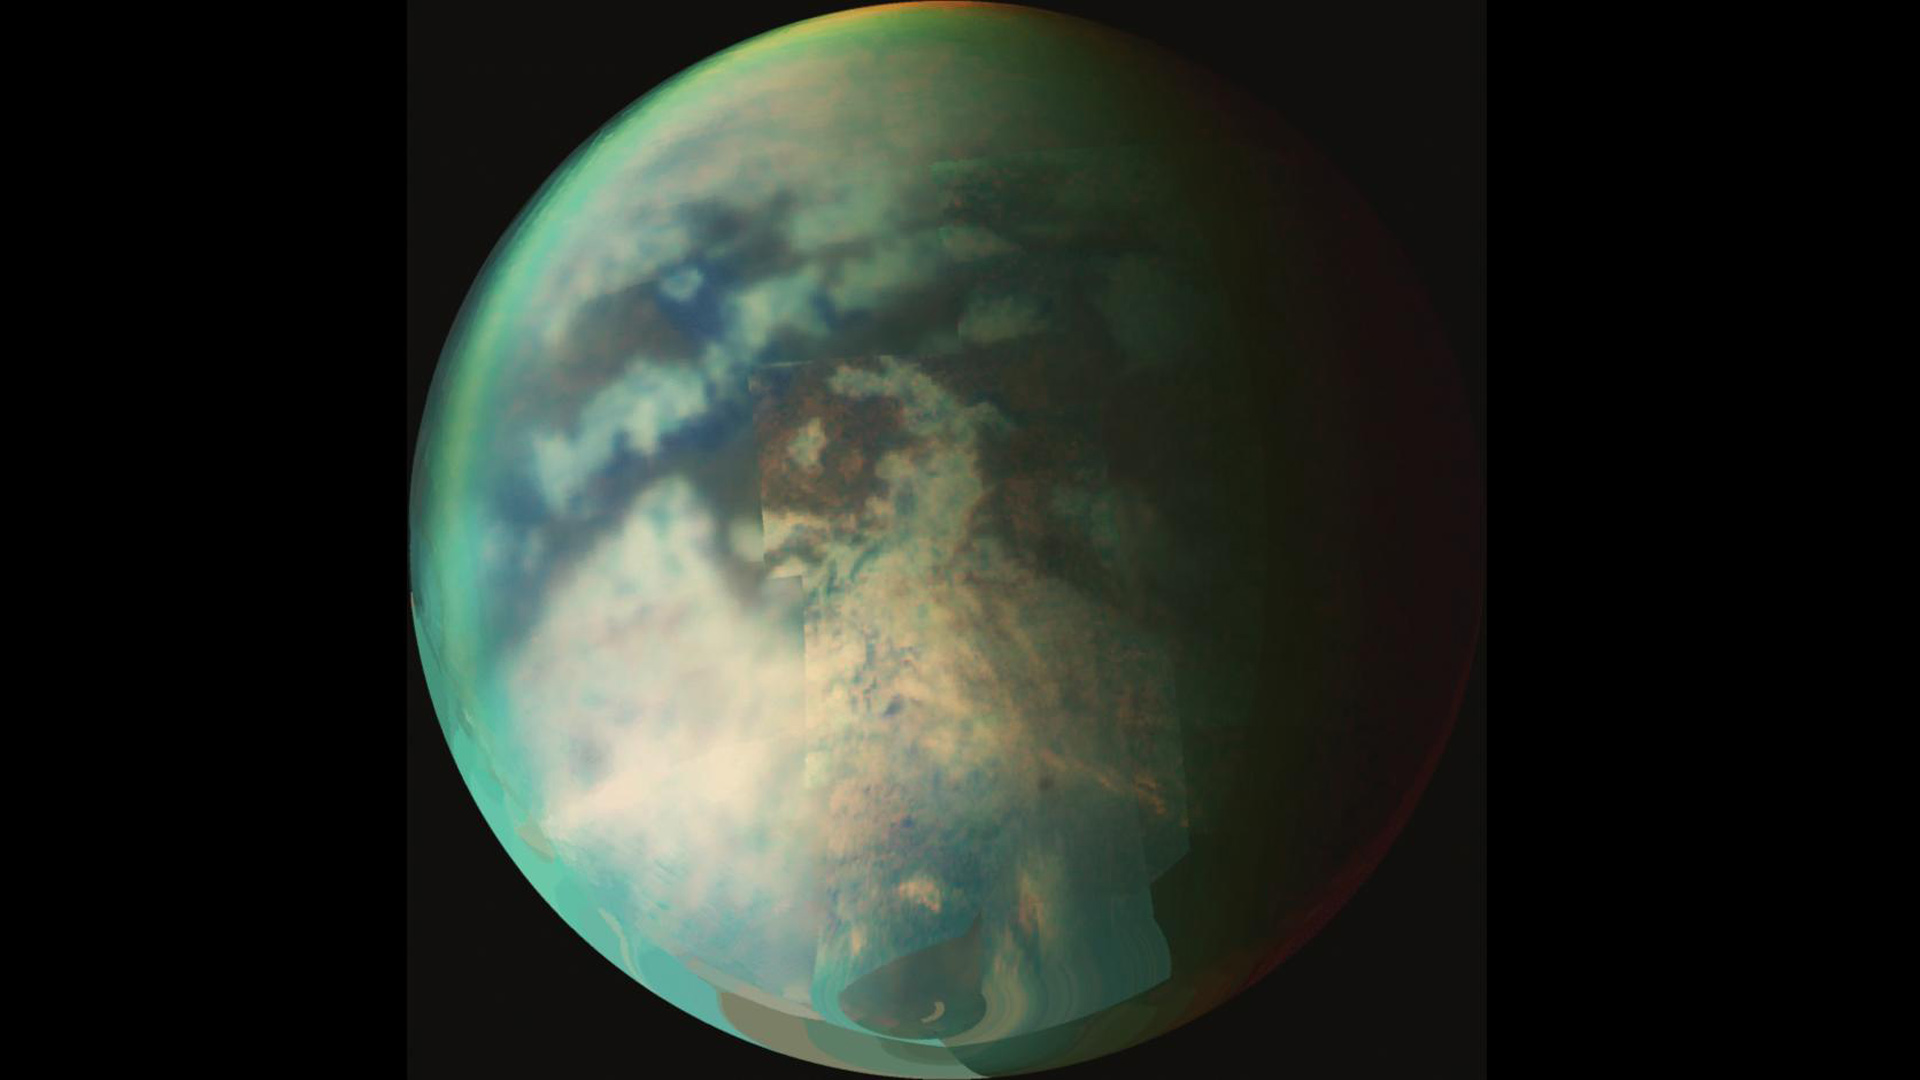 Saturn's moon Titan looks a bit like Earth but is actually very different.